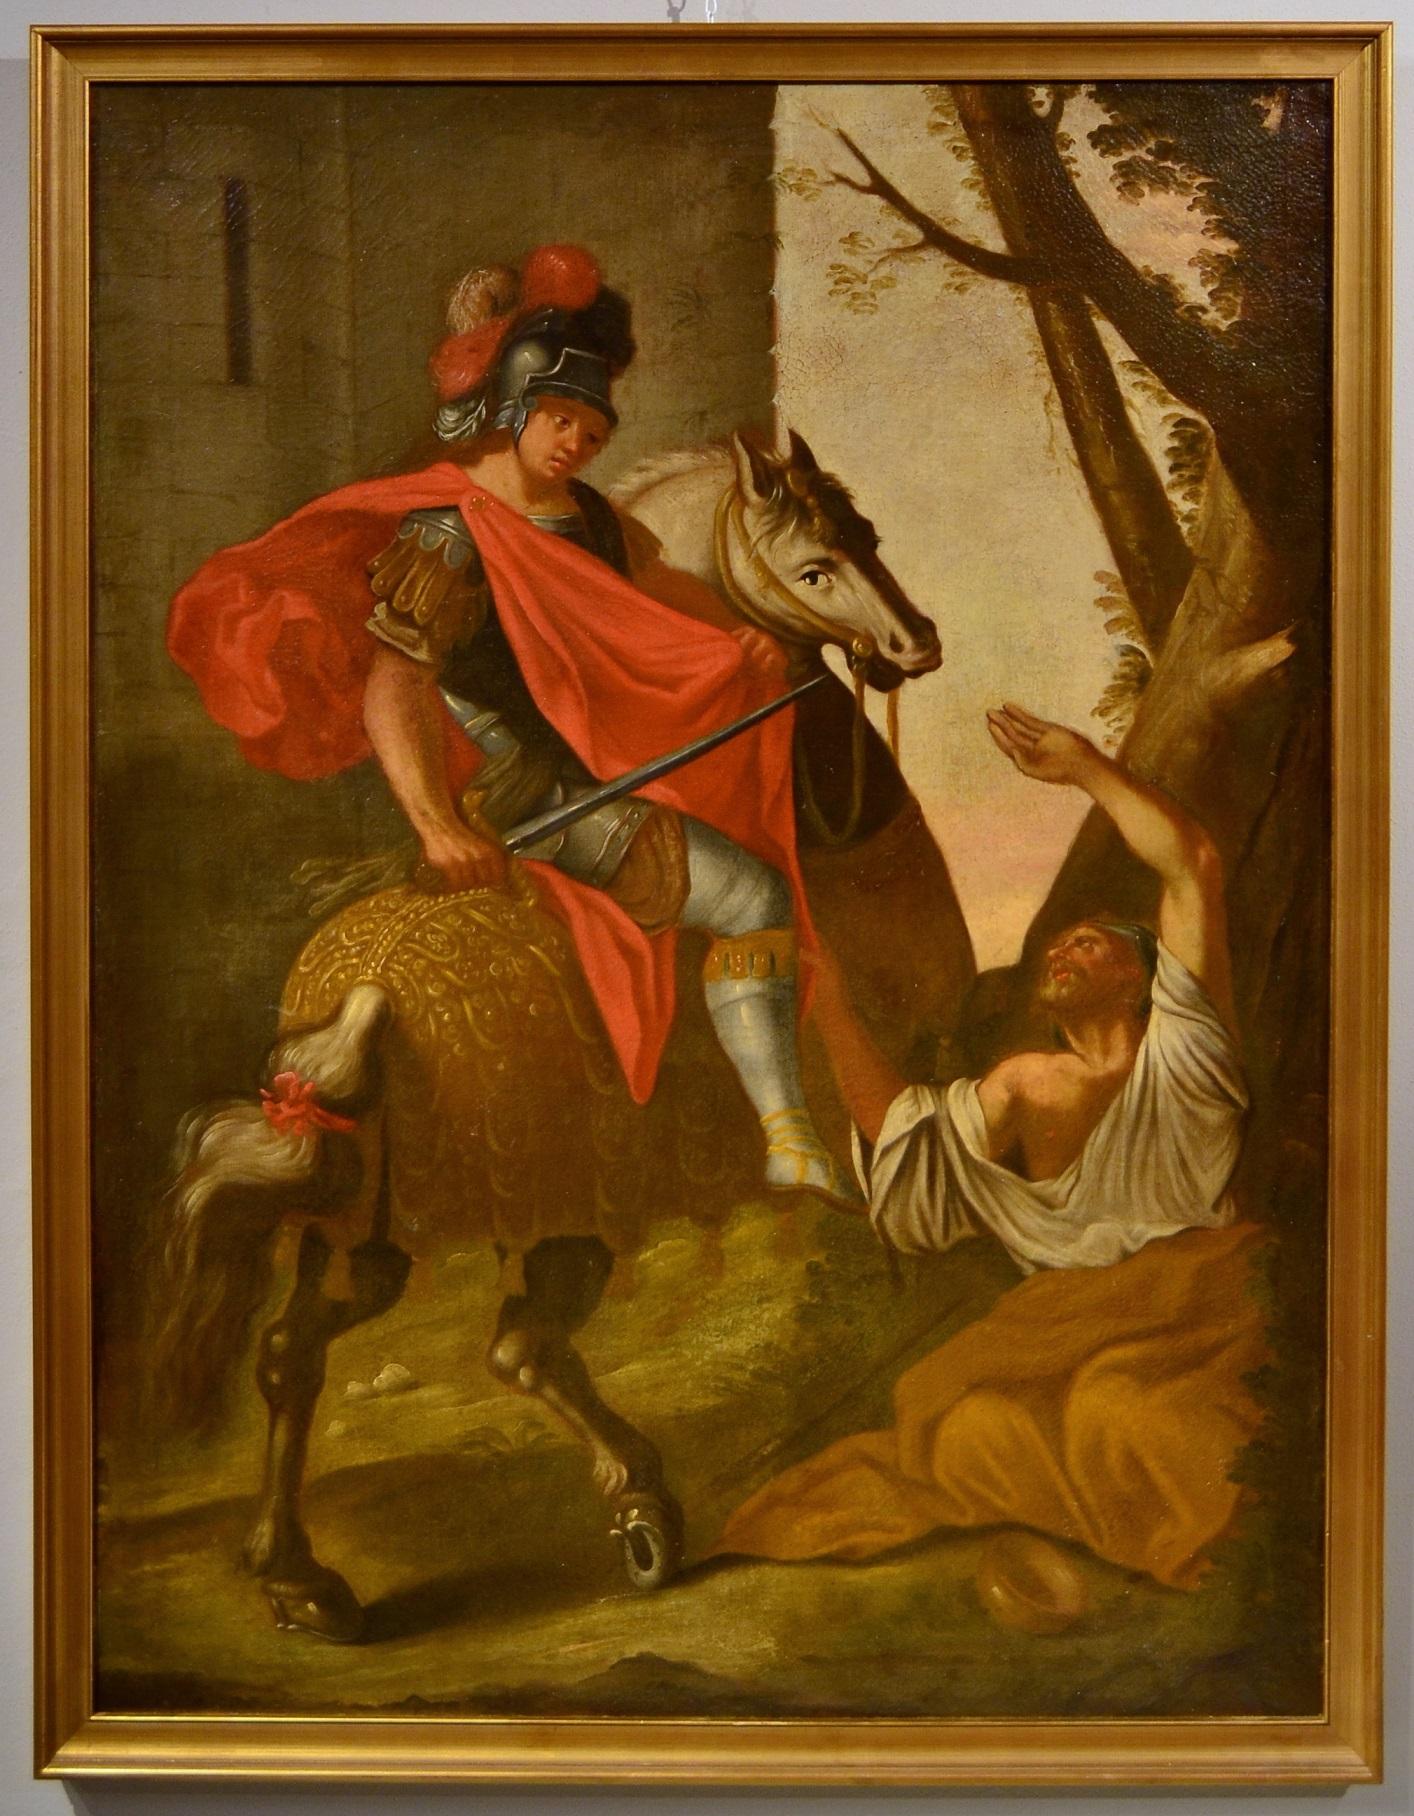 Saint Martin Paint Oil on canvas 17th Century Italian school Old master Baroque - Painting by Unknown